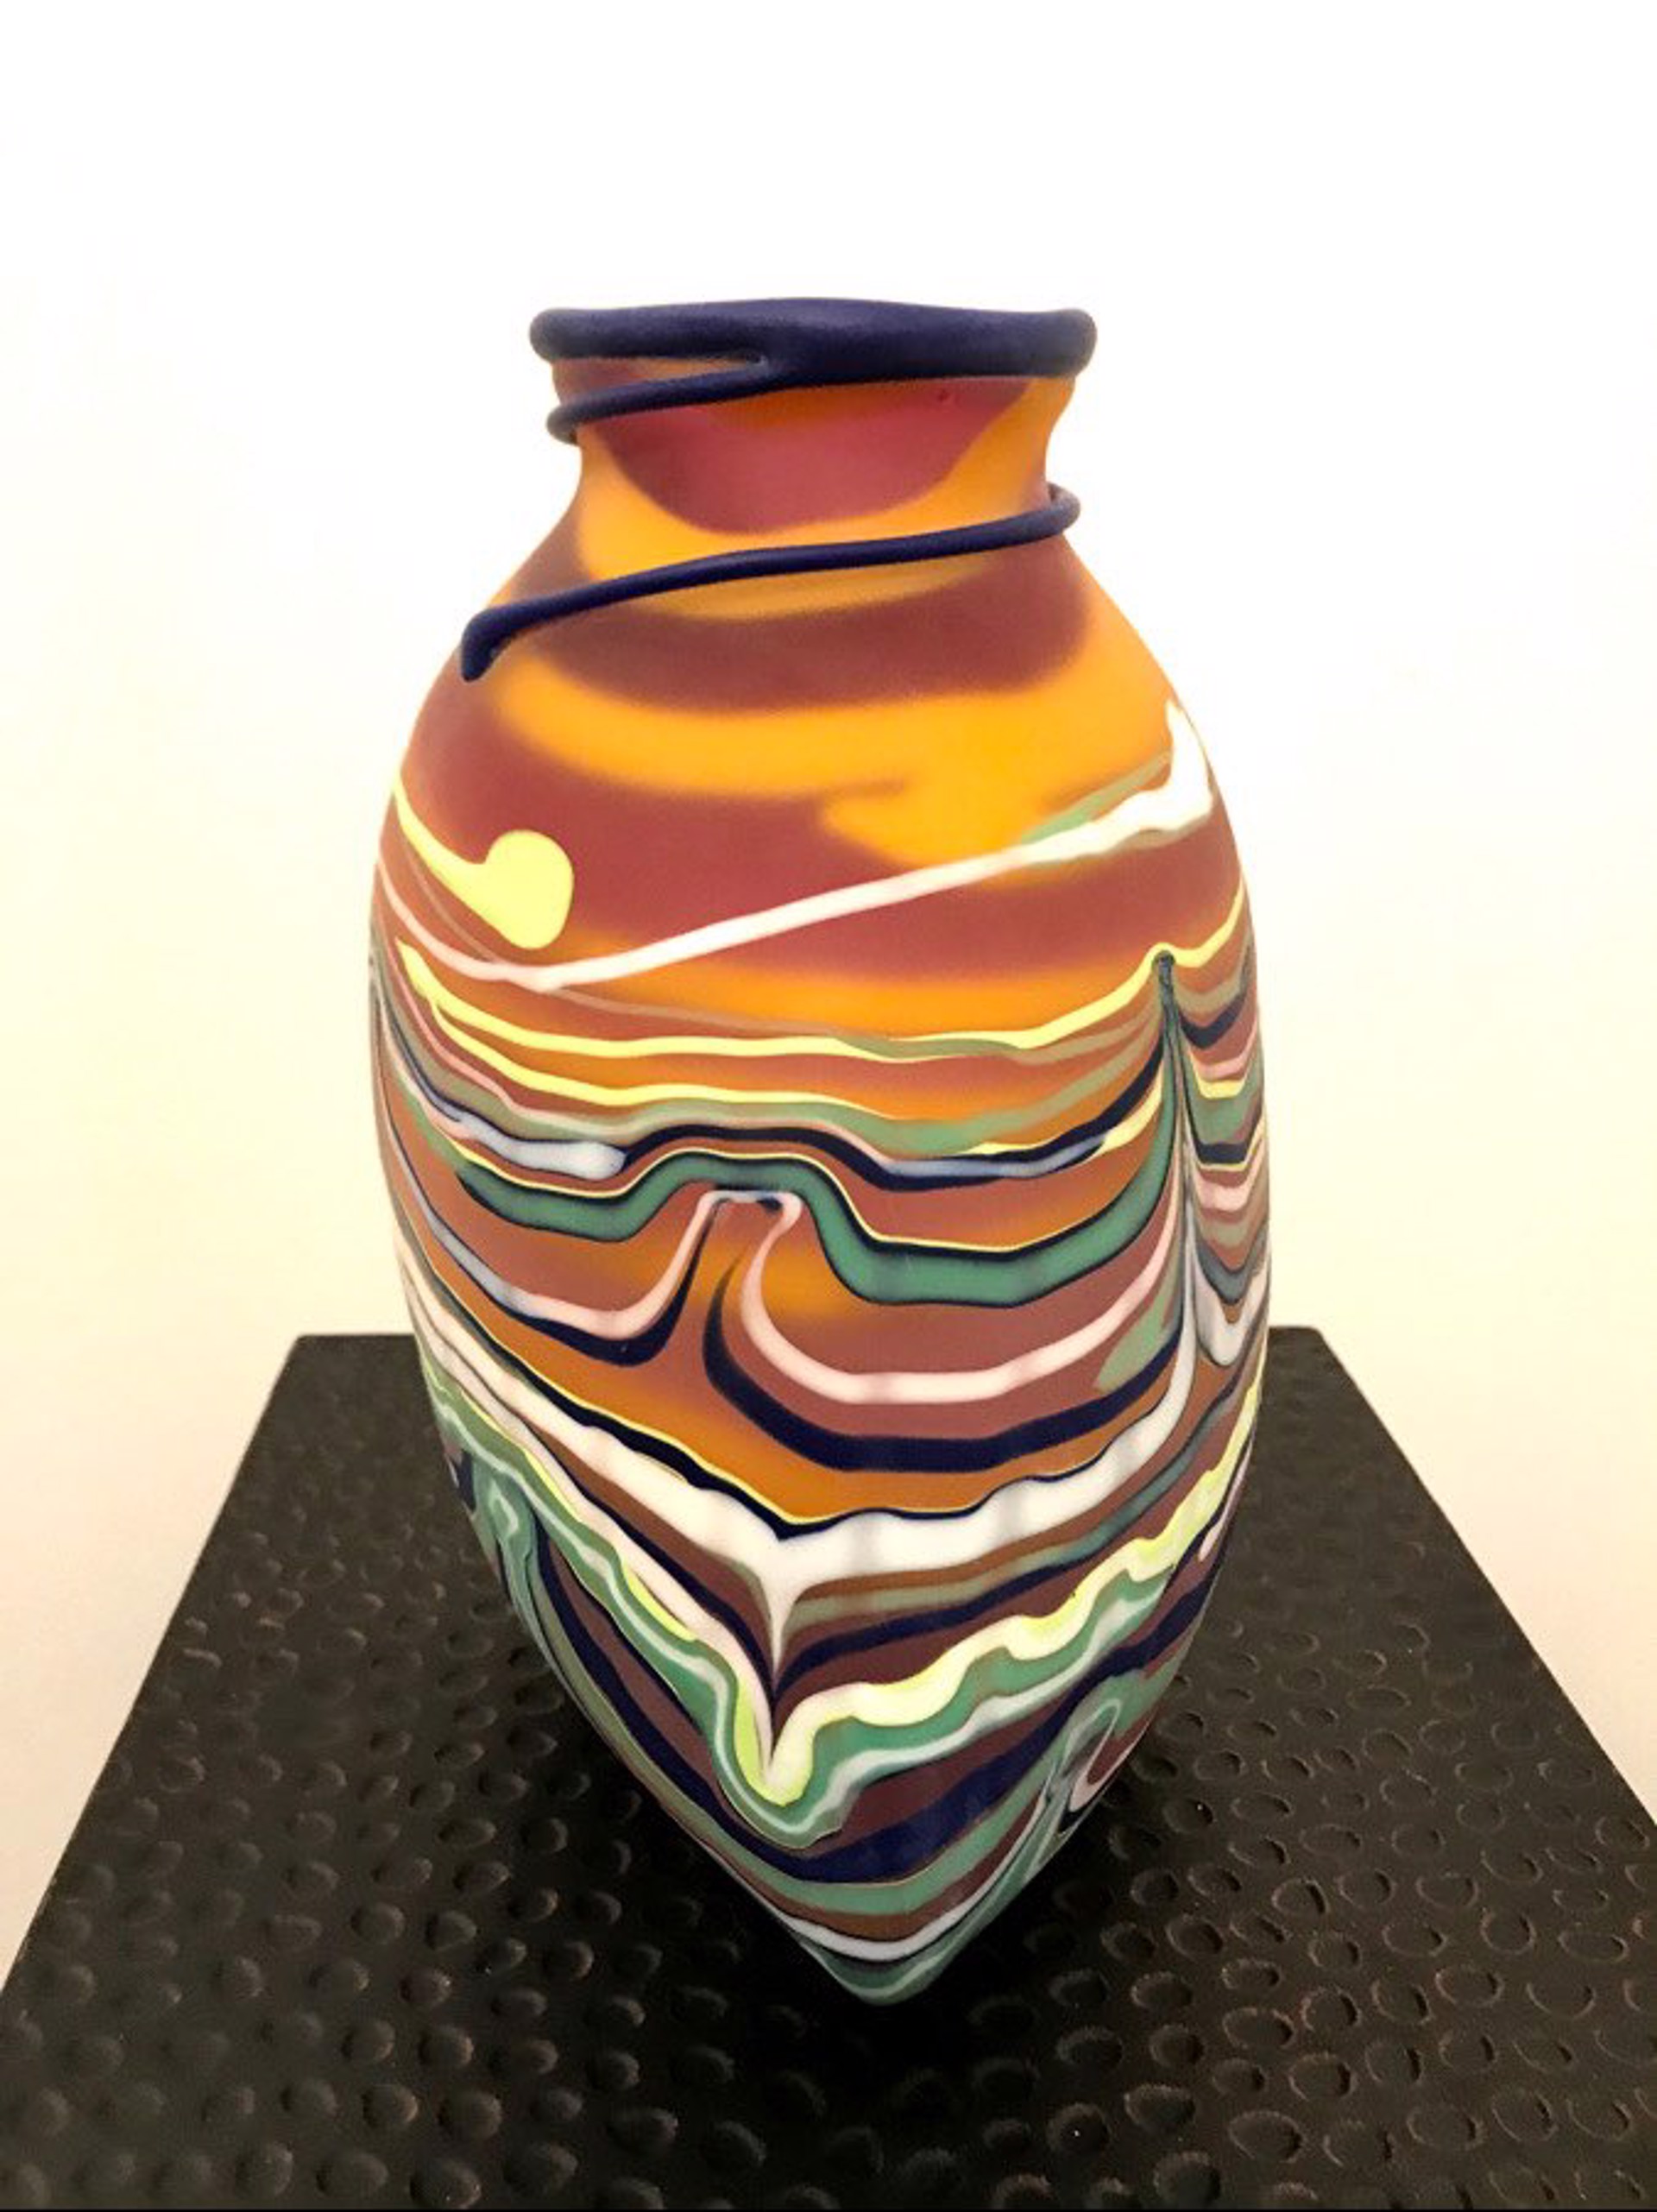 Orange Triangle Pot with Wrap by Rene Culler